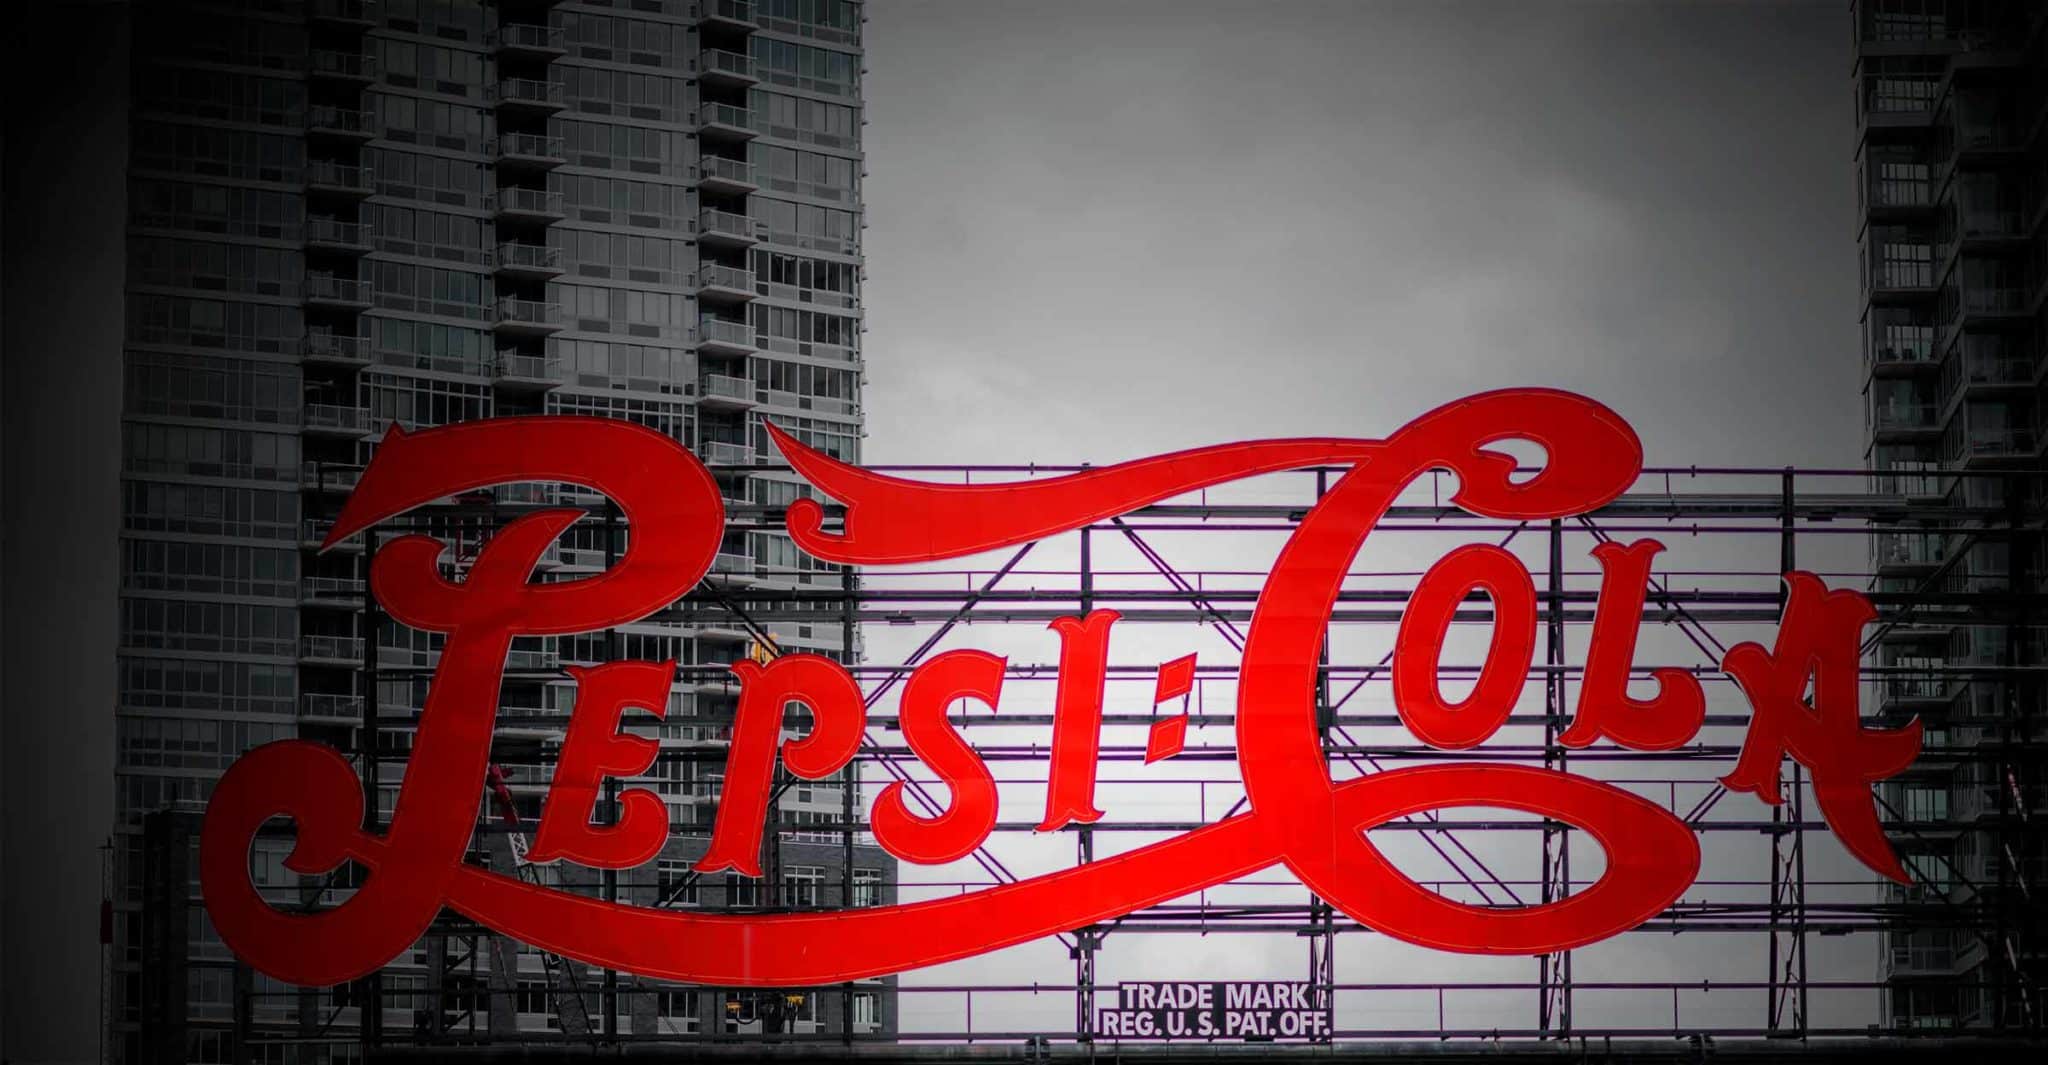 A neon sign of Pepsi-Cola logo set against skyscrapers in the background